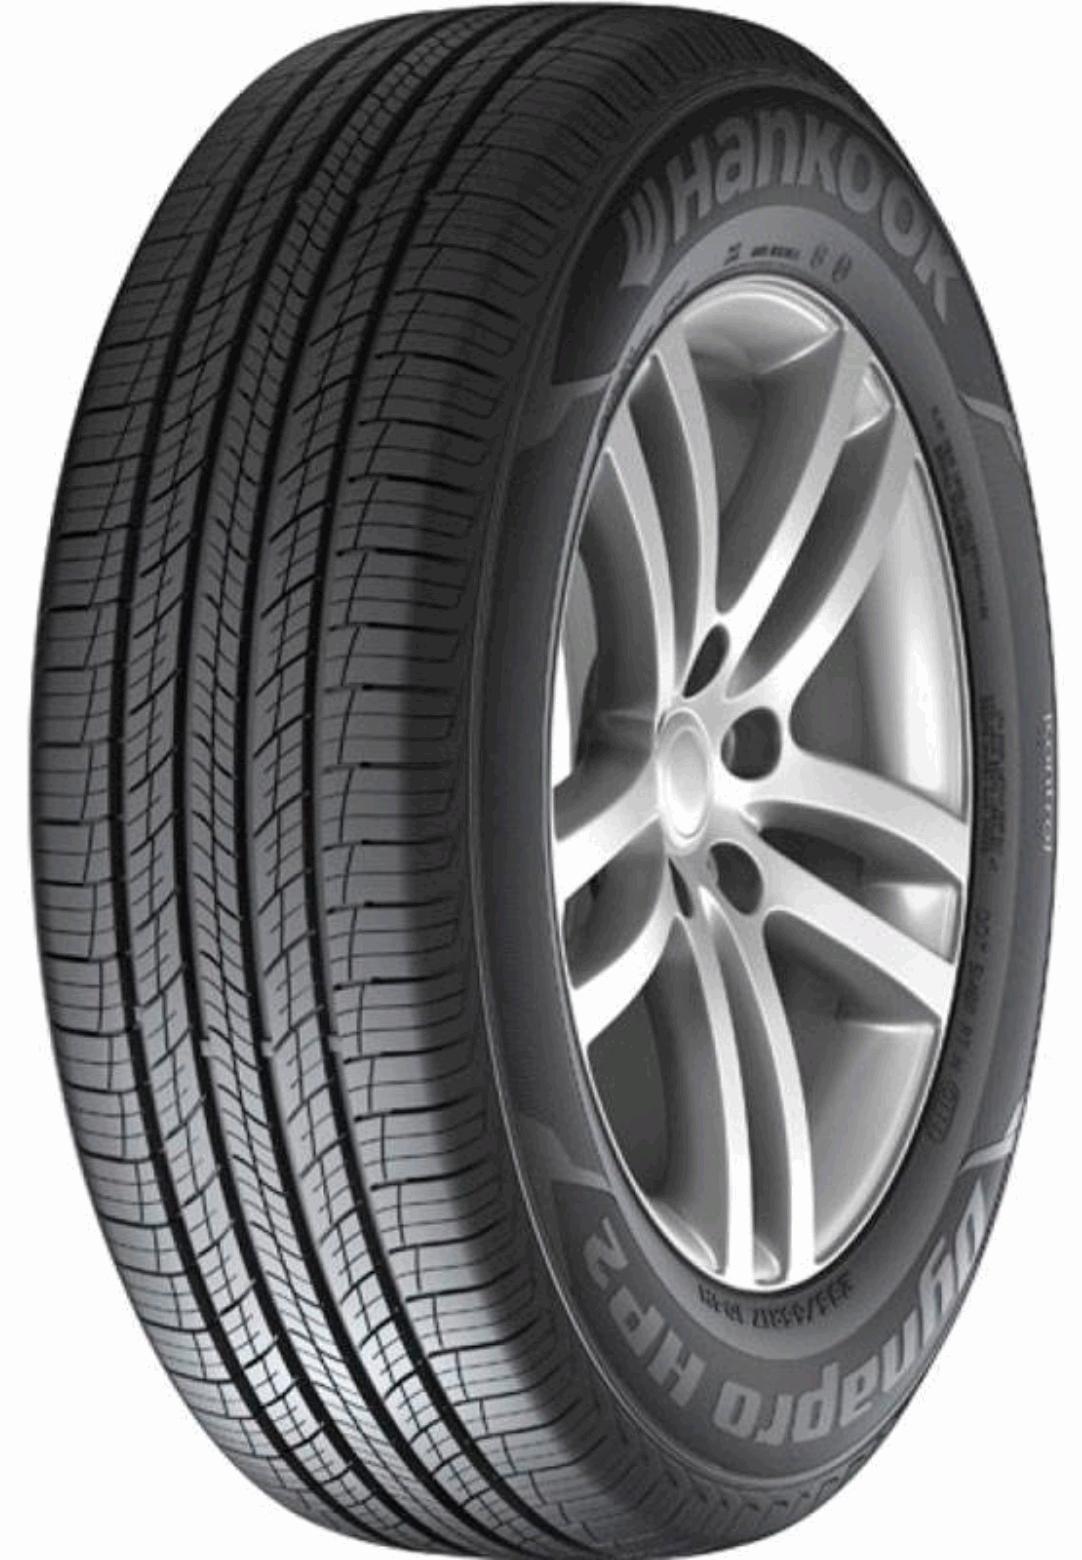 Hankook Dynapro HP2 RA33 and Tests - Tire Reviews